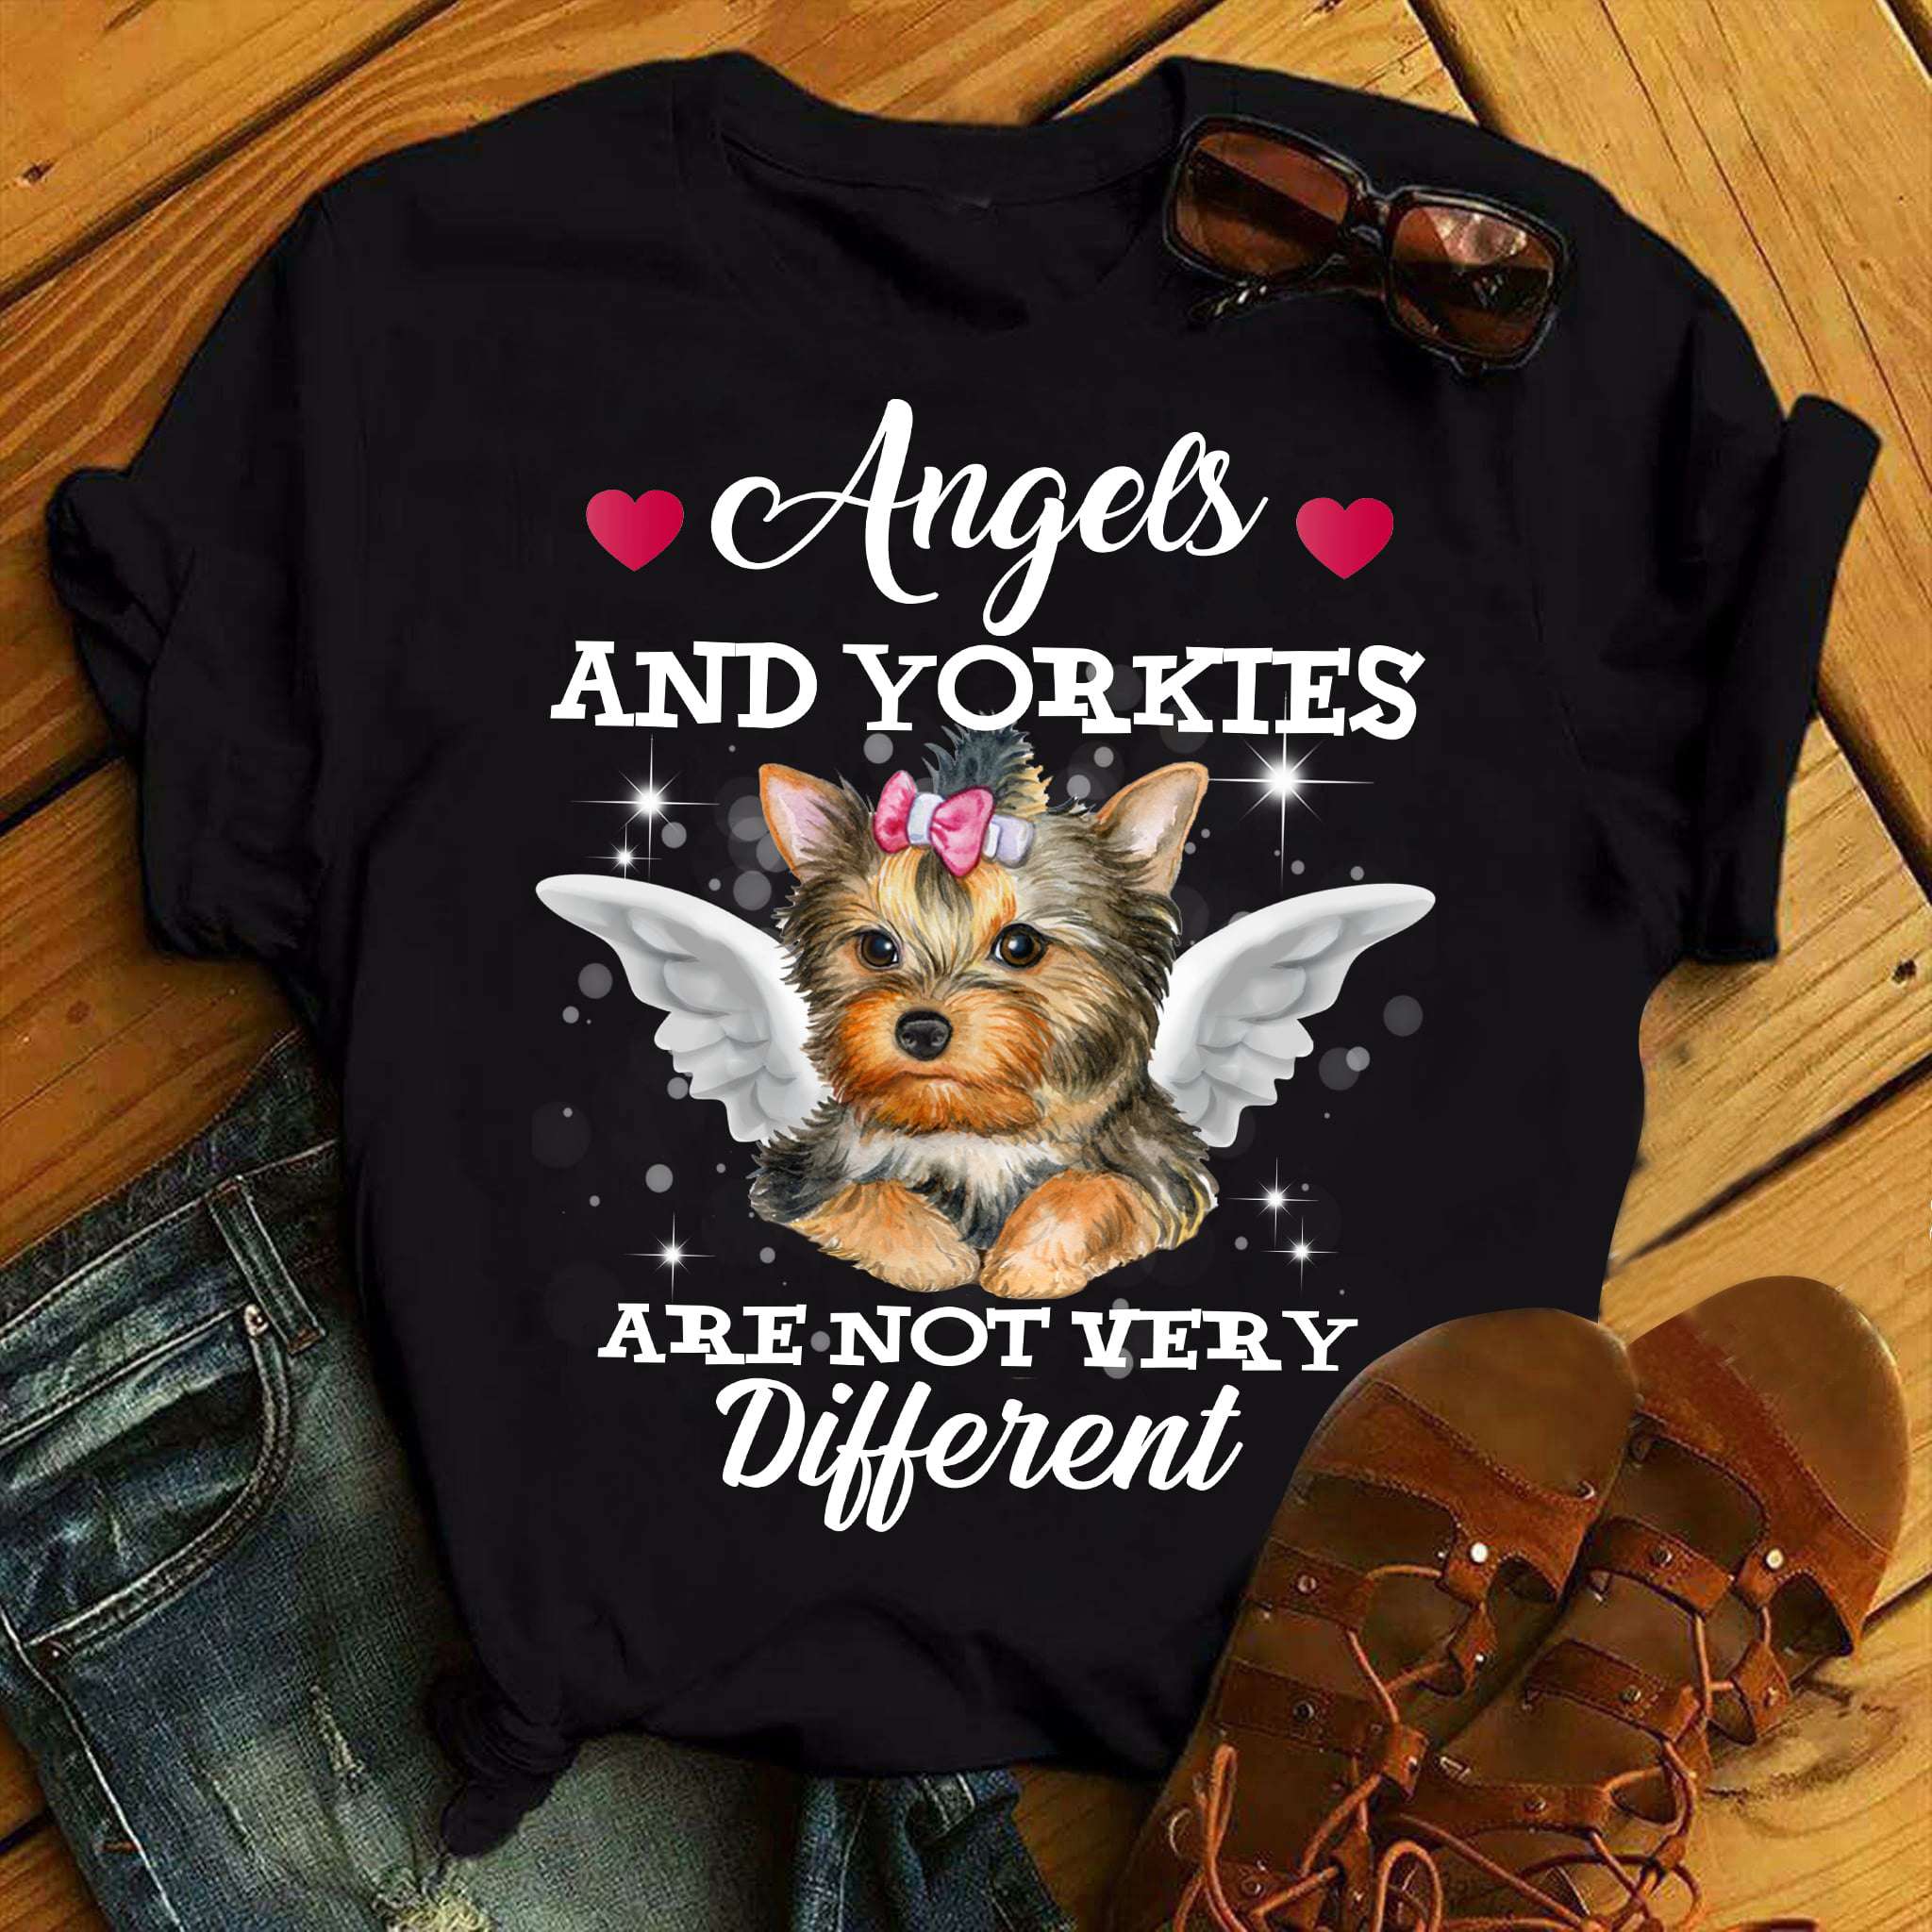 Angel Yorkies - Angels and yorkies are not very different